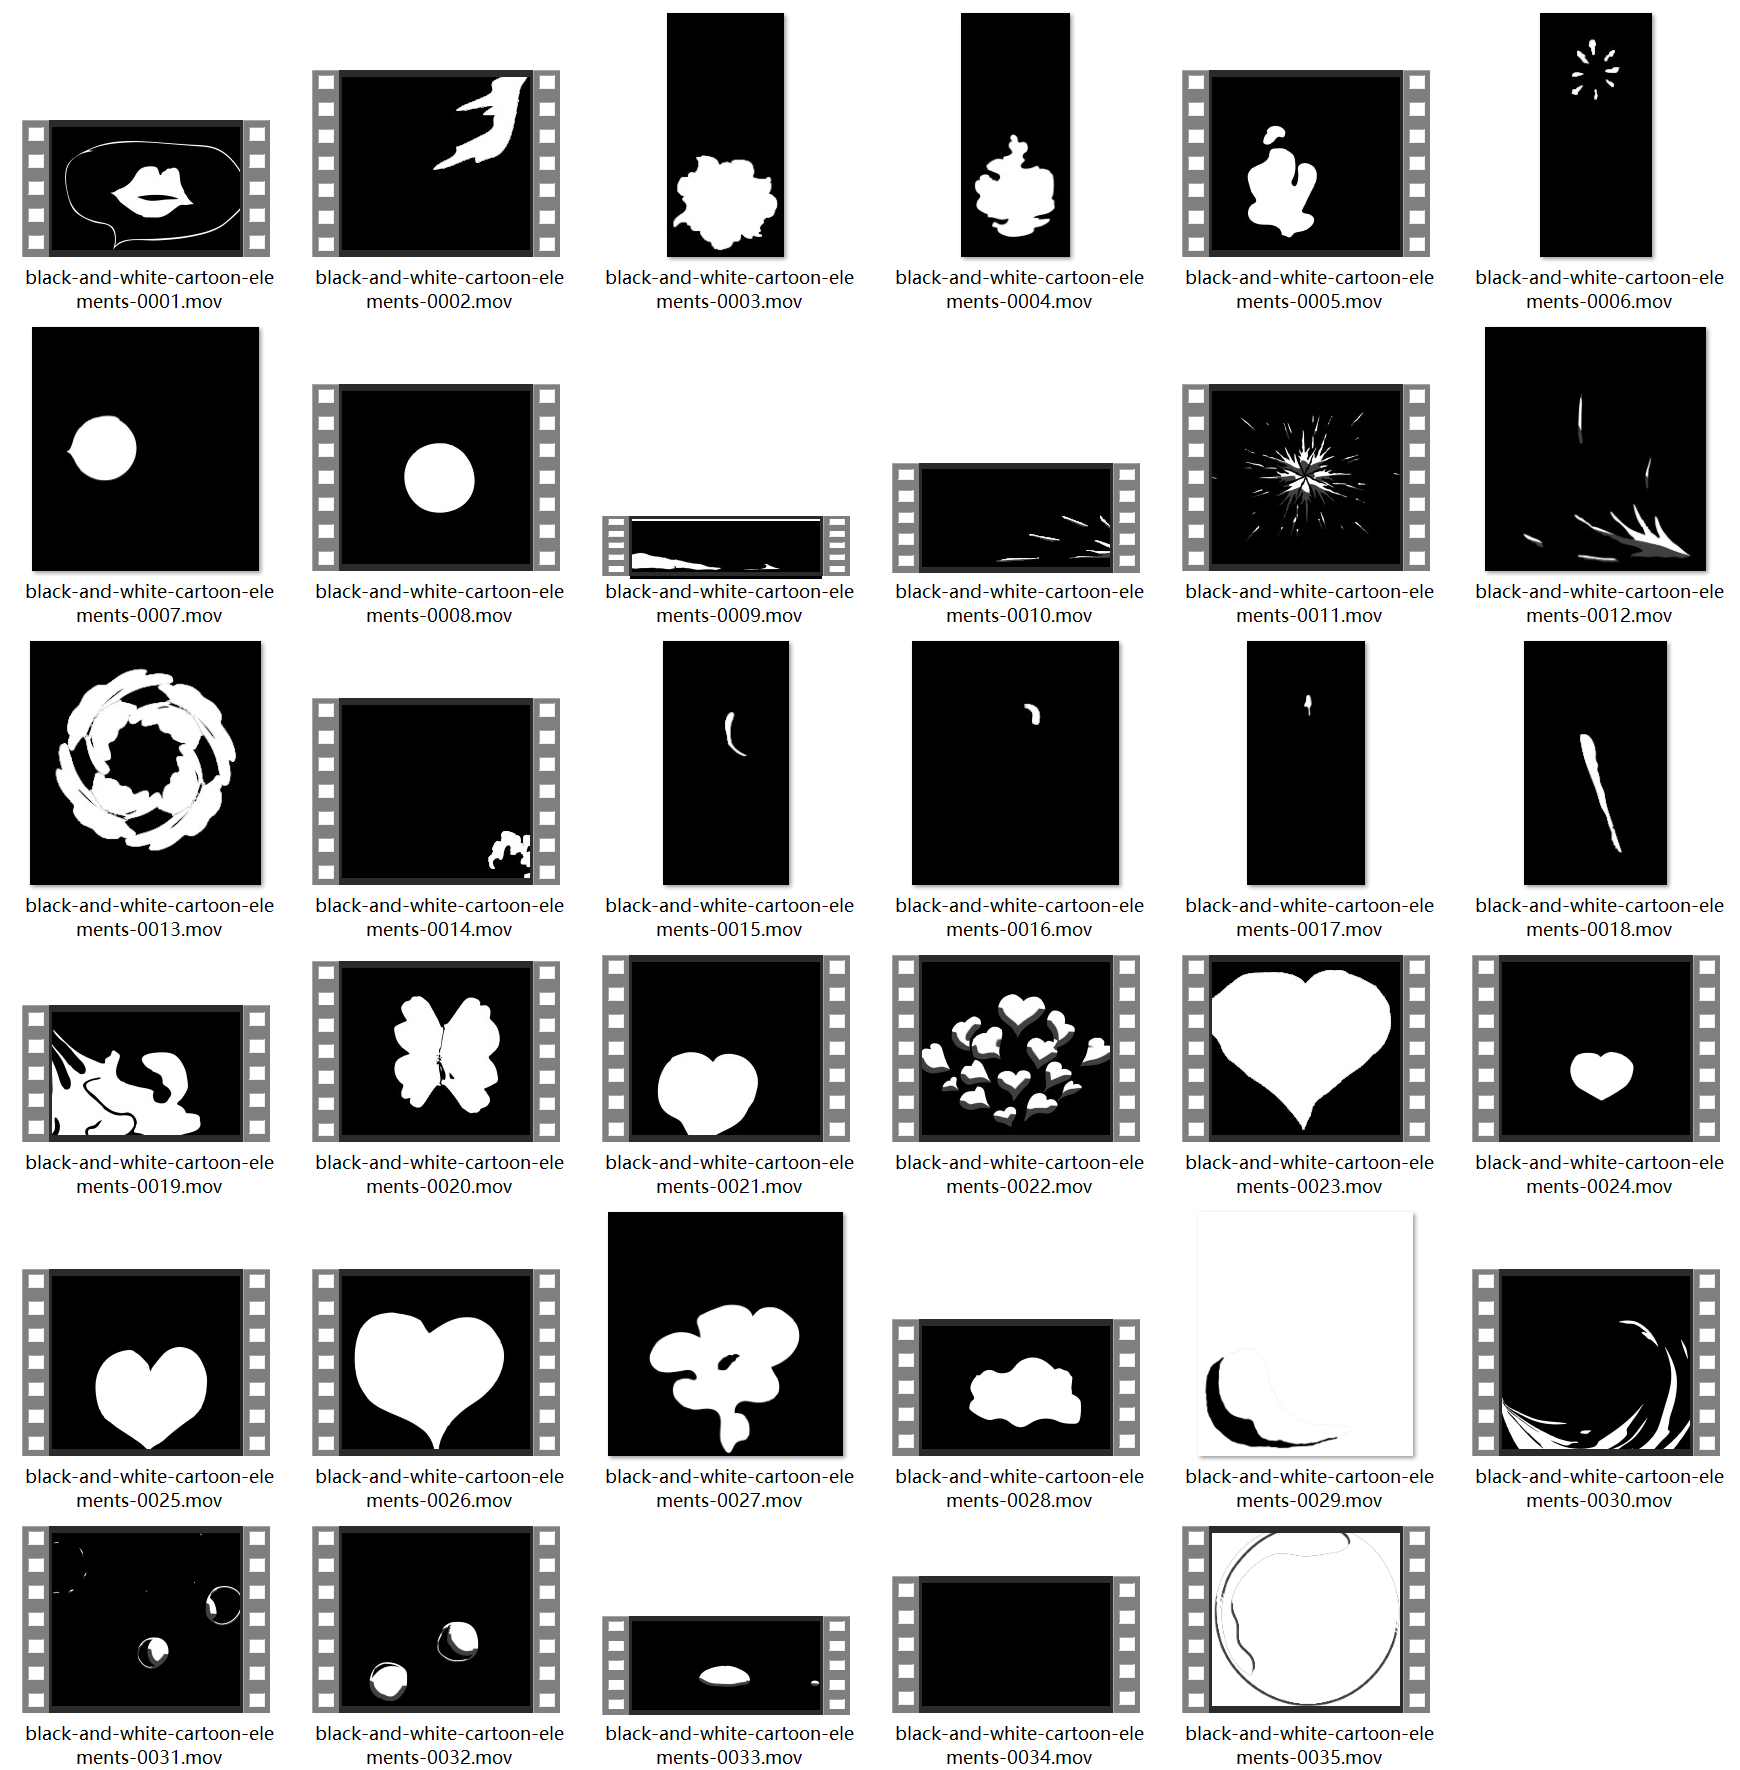 black and white cartoon elements-s0220001a1